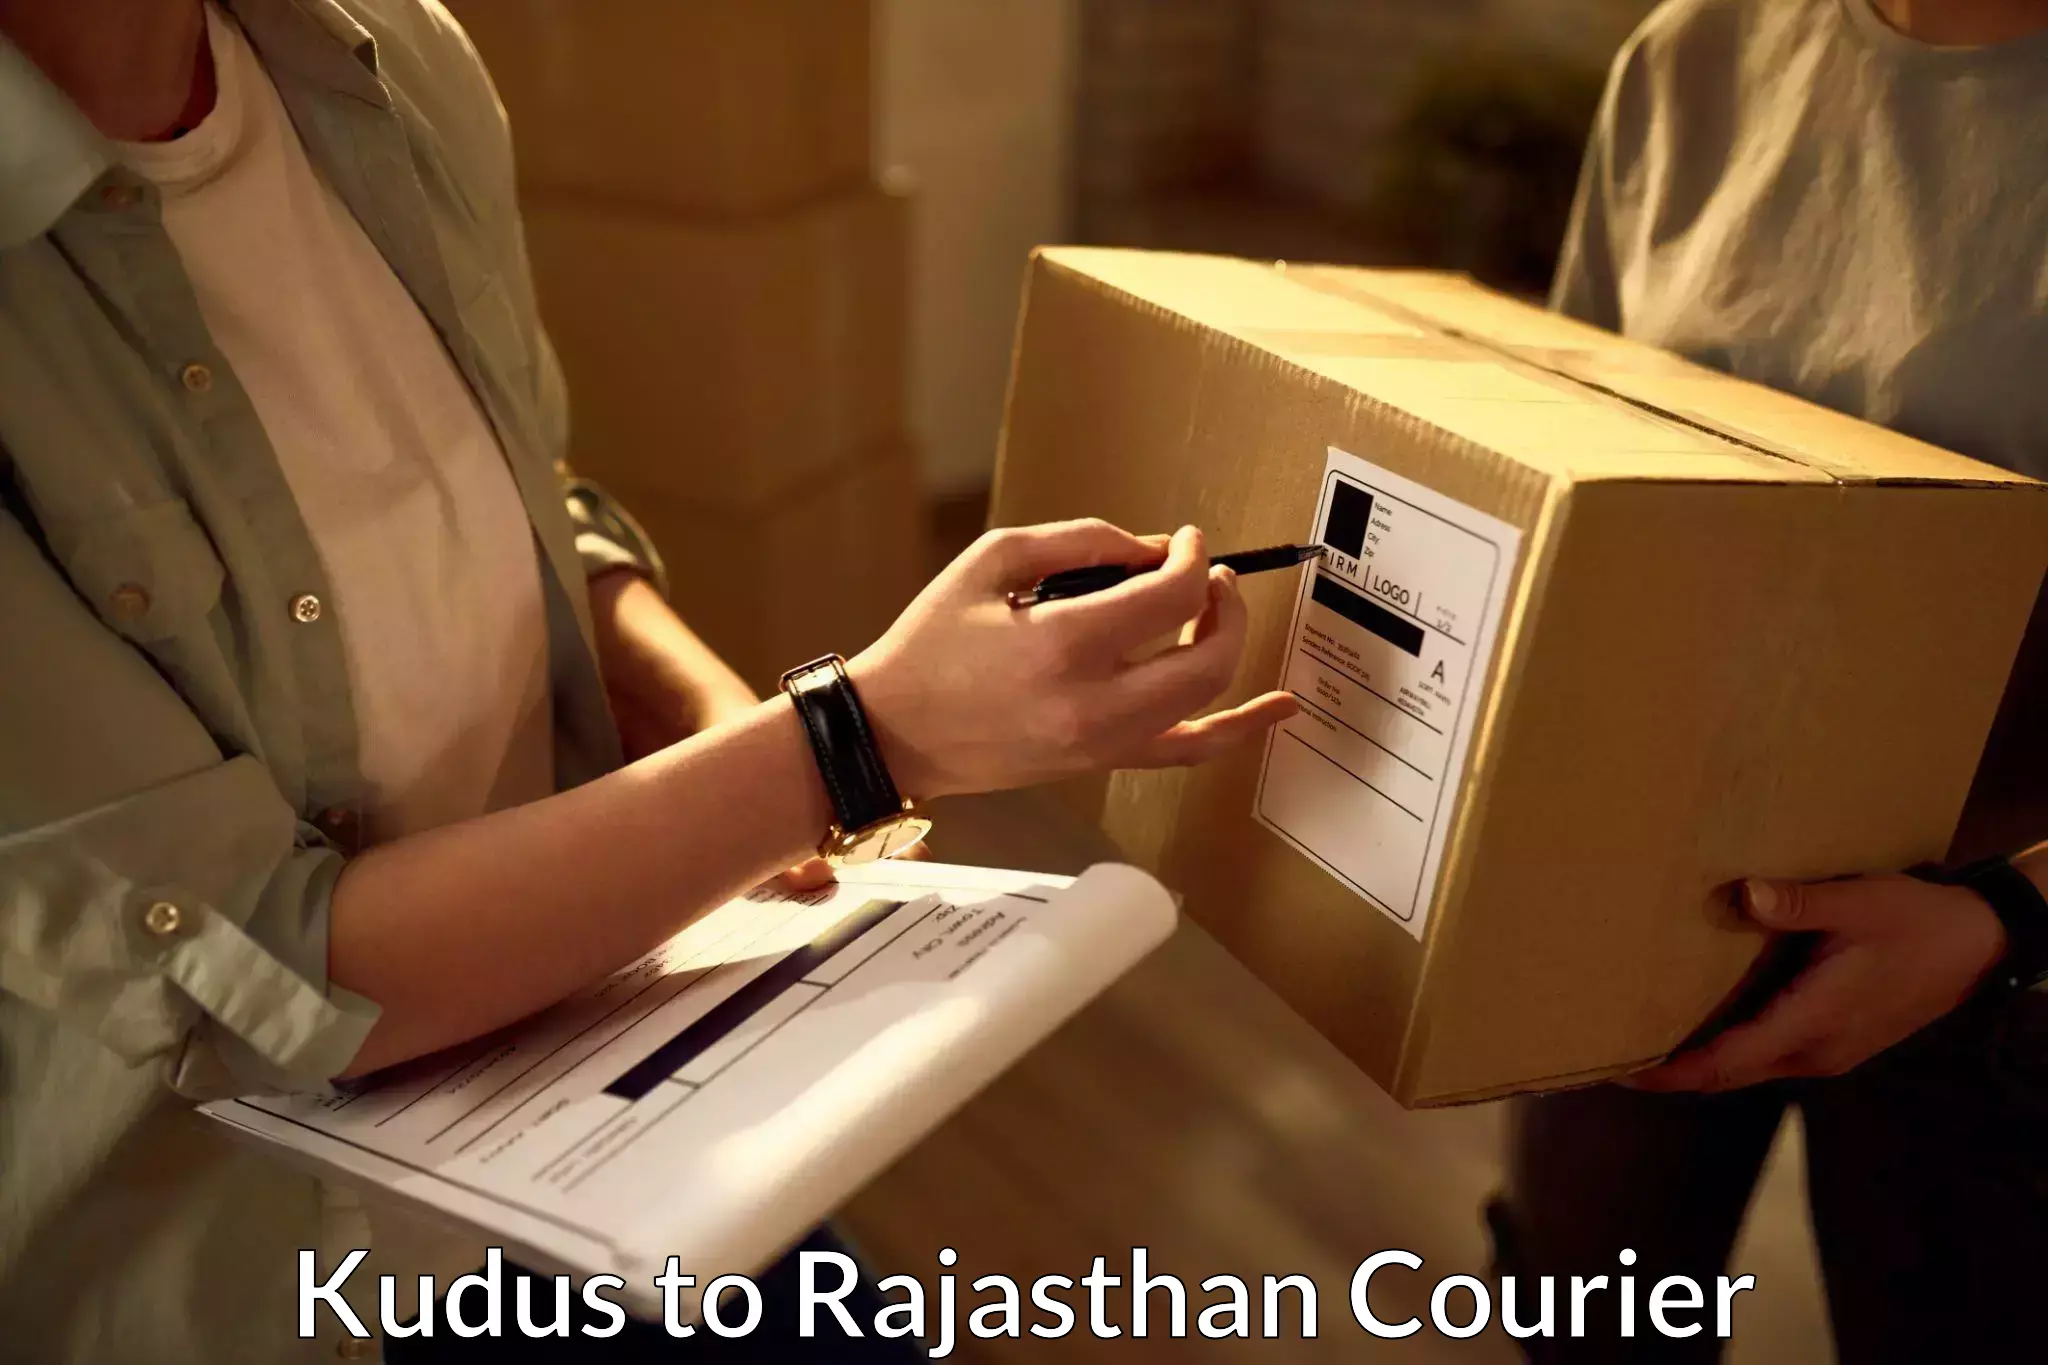 State-of-the-art courier technology Kudus to Chaumahla